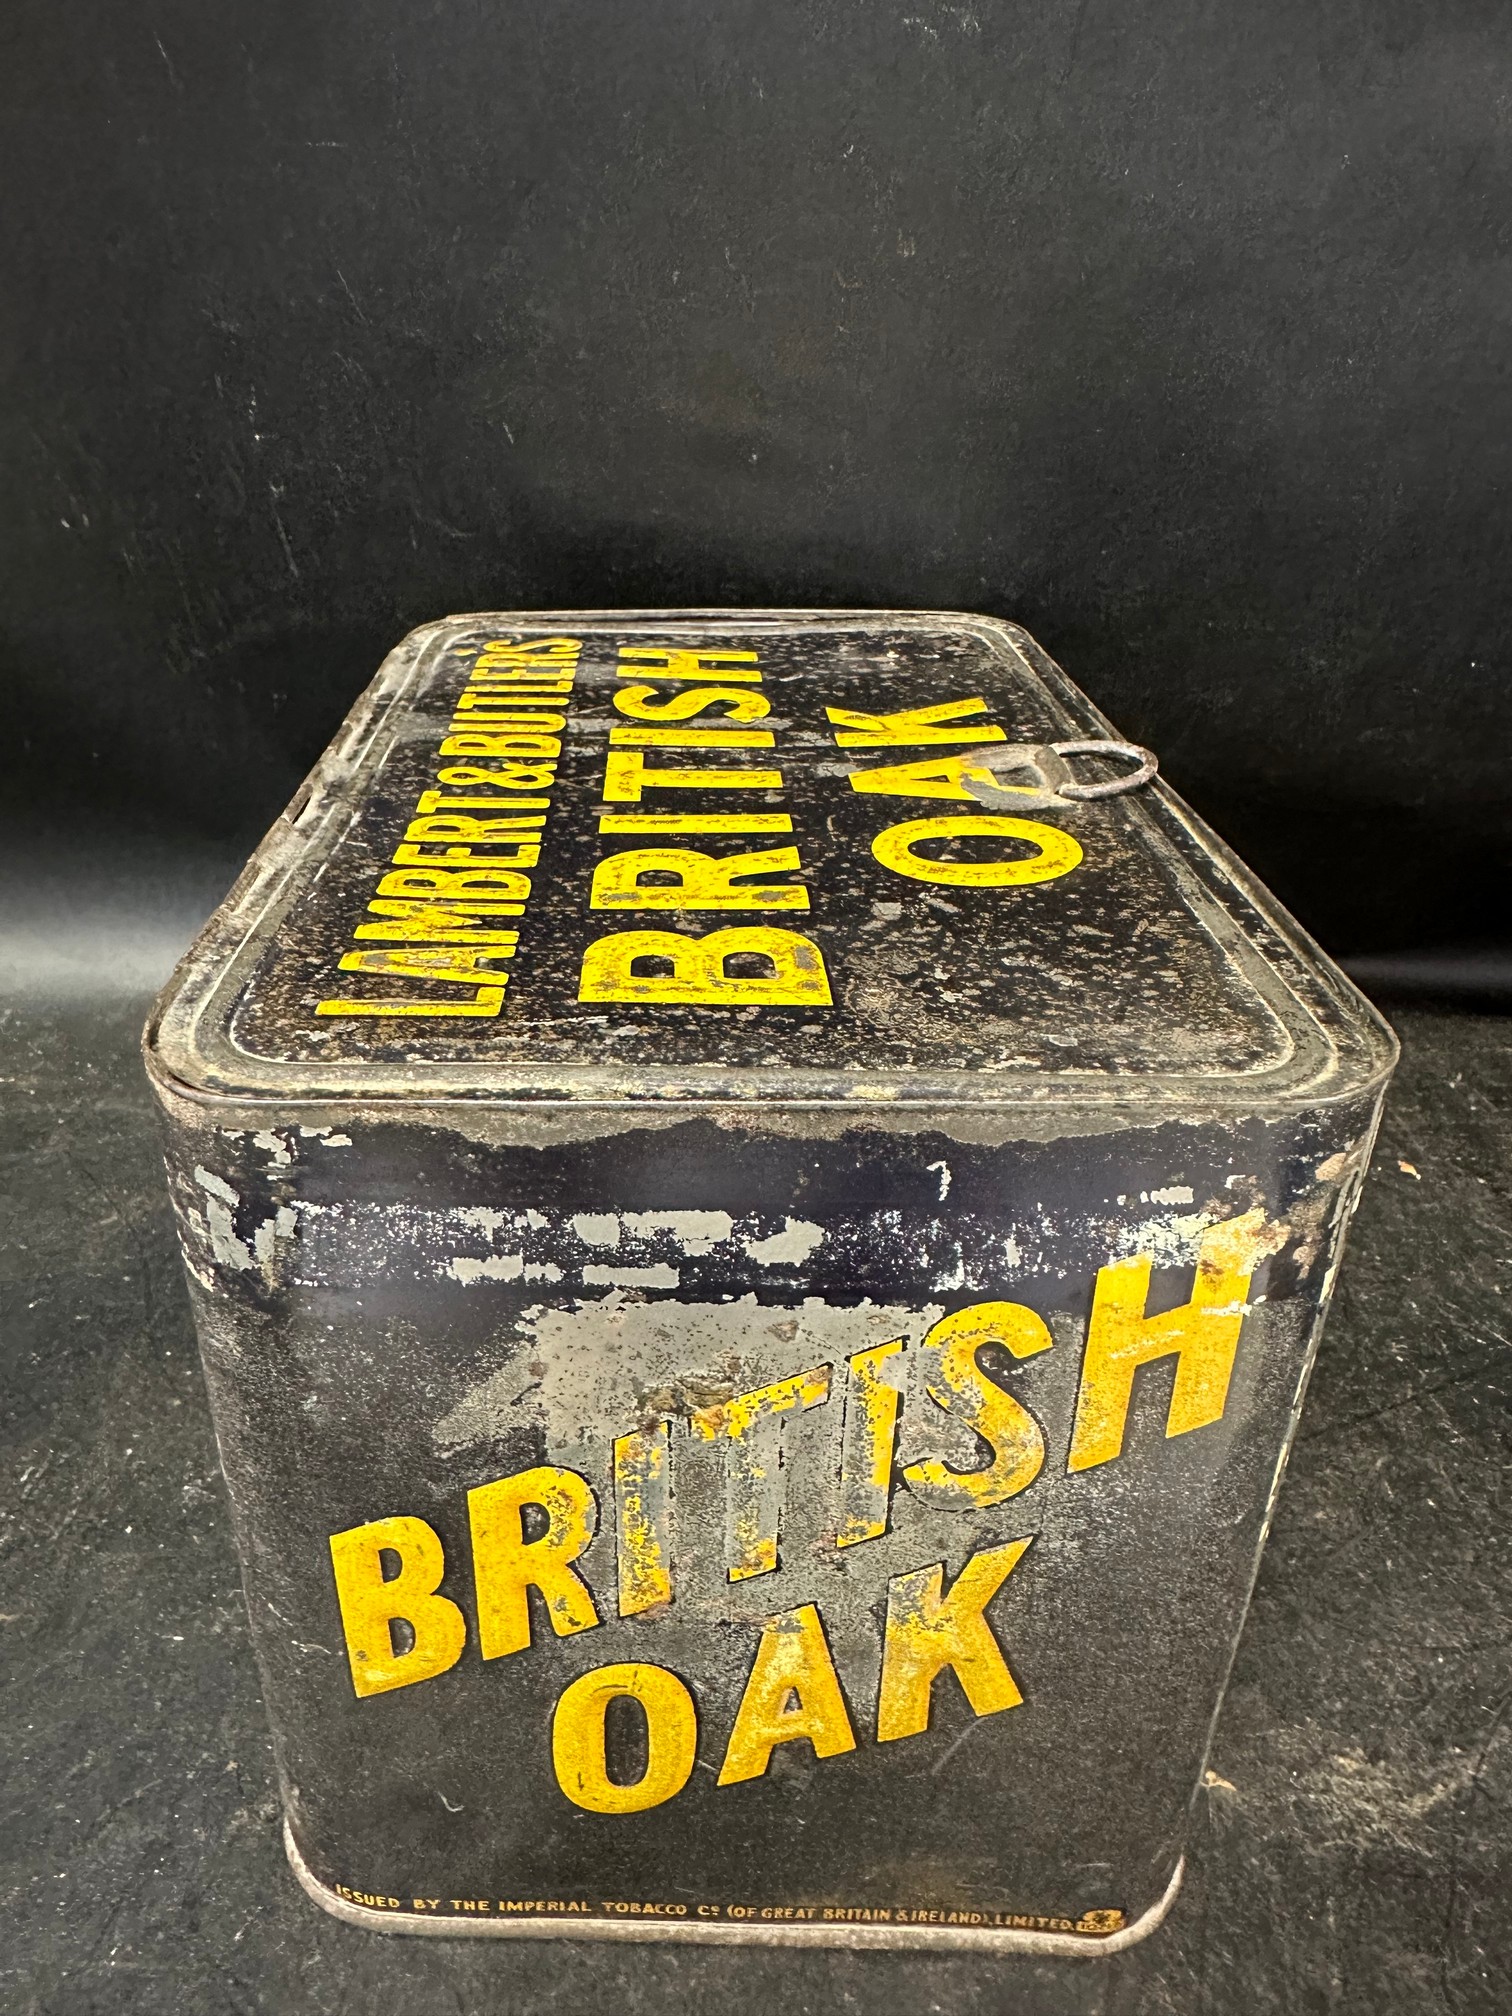 A Lambert & Butler's British Oak in packets and tins only counter box for "British Oak Shag", issued - Image 4 of 8